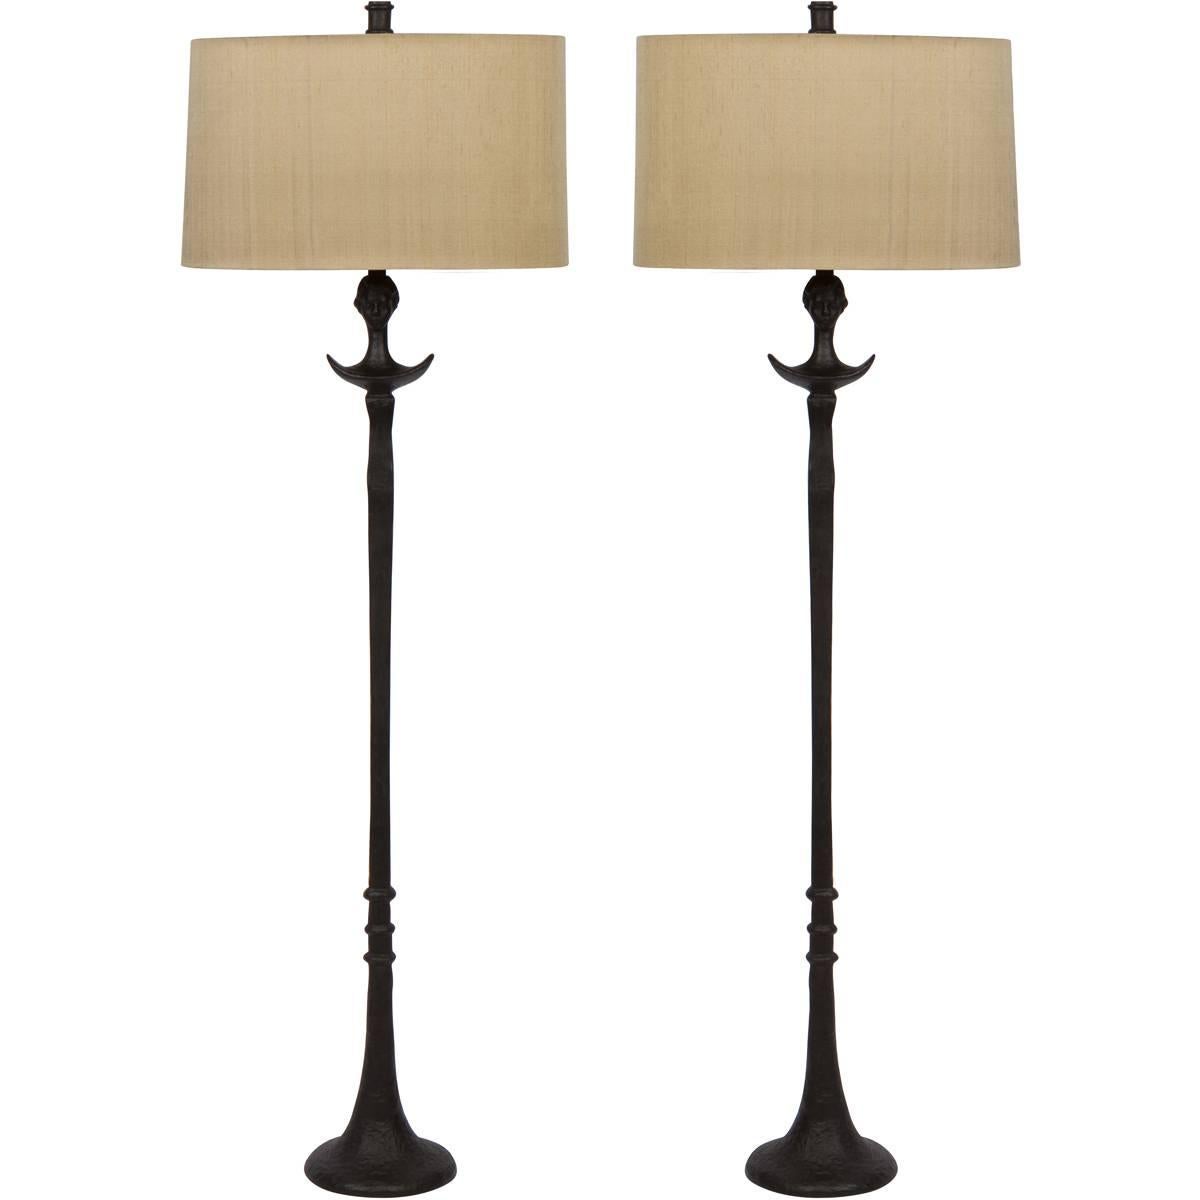 Pair of Floor Lamps in the Style of Diego Giacometti